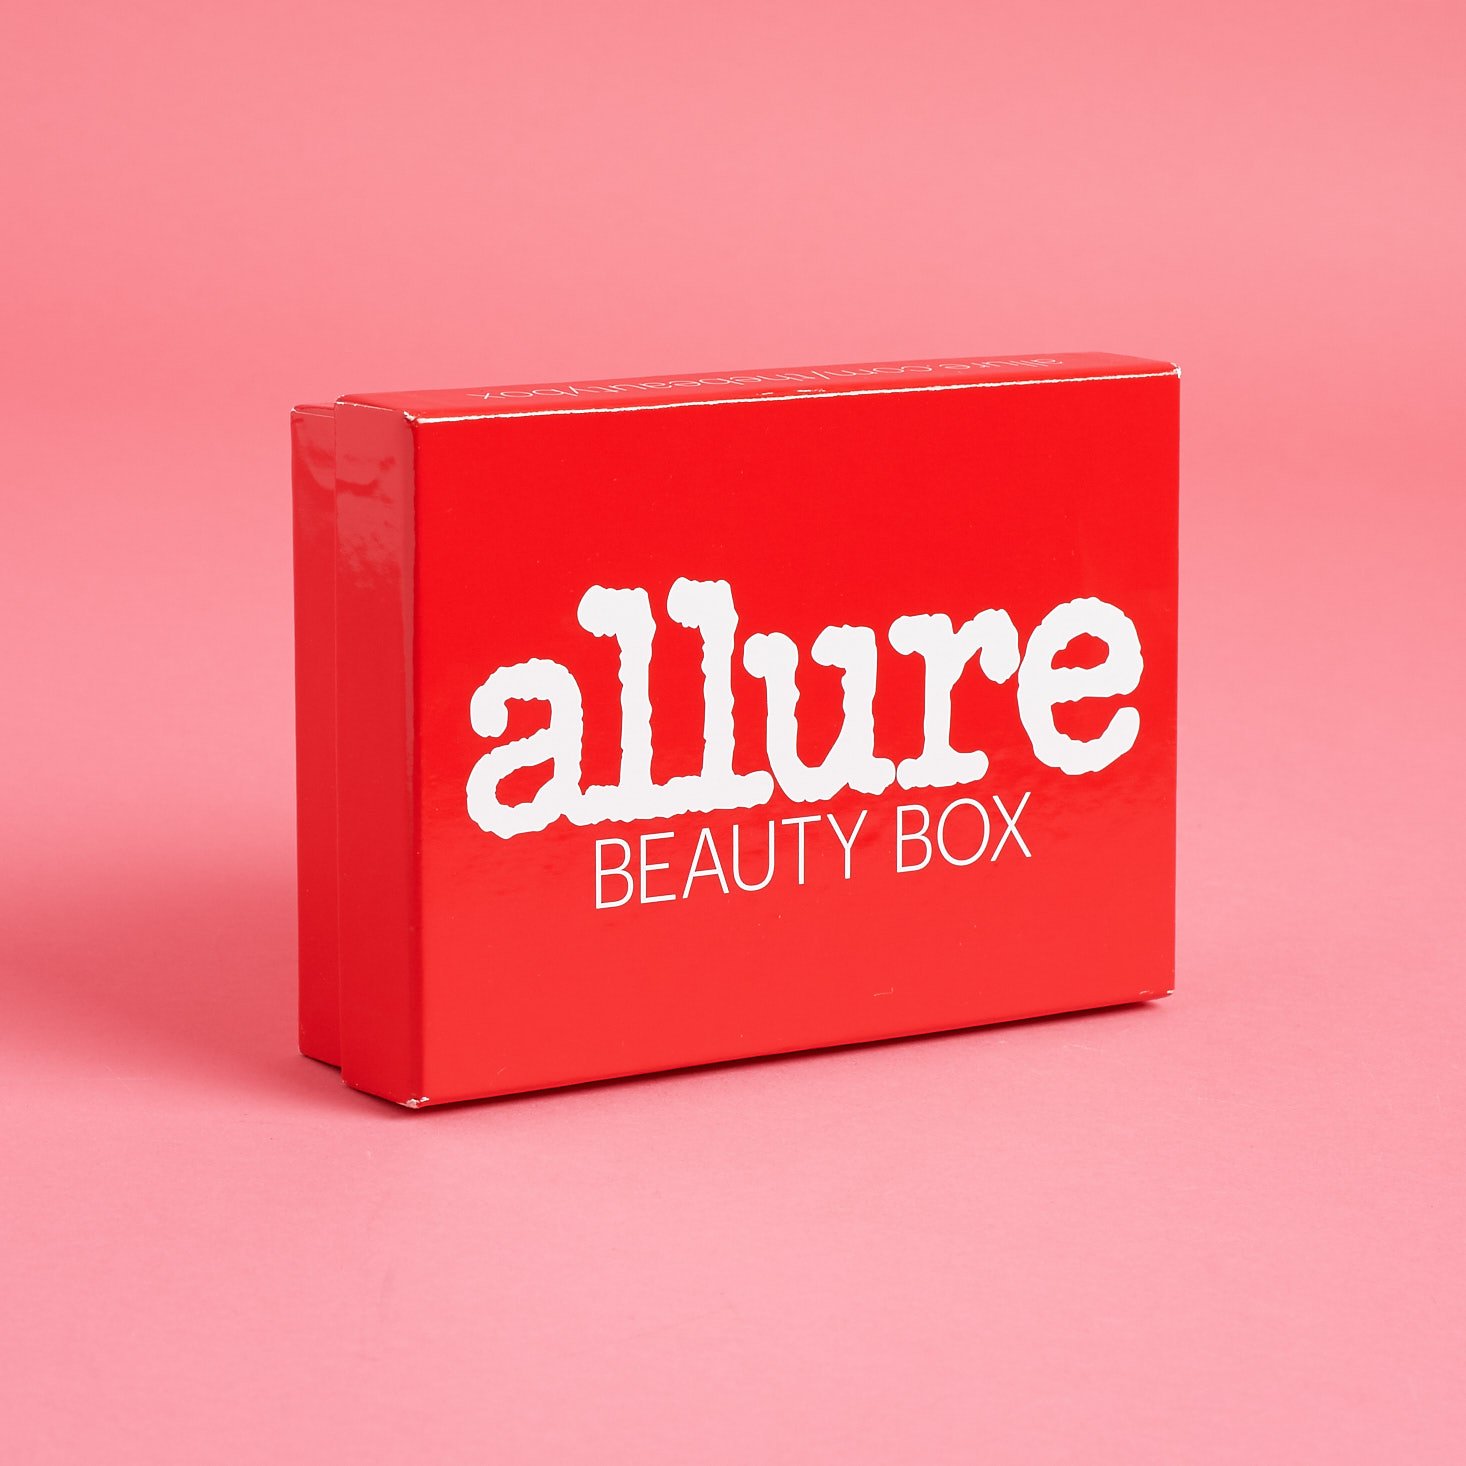 How Much Does Allure Beauty Box Cost?